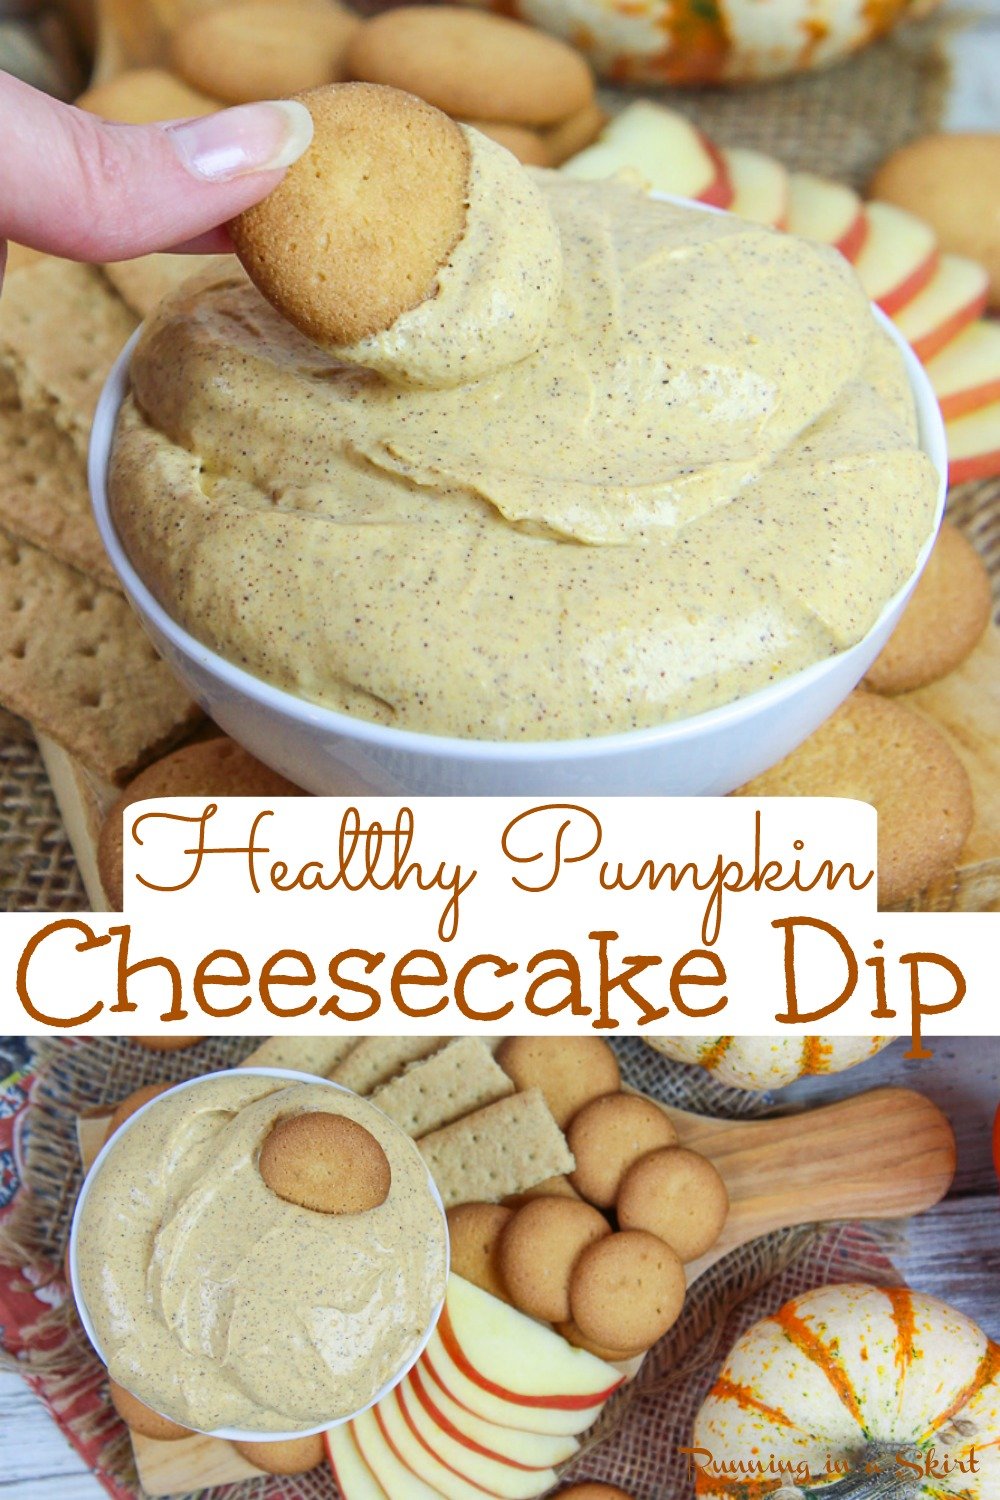 Healthy Pumpkin Cheesecake Dip recipe - only 6 Ingredients! This skinny, easy and fluffy Pumpkin Dip is made with cream cheeses, greek yogurt, maple syrup, and pumpkin. The best dip for Halloween, Fall parties or Thanksgiving. Vegetarian / Running in a Skirt #vegetarian #healthy #thanksgiving #fallfood #recipe #pumpkin #healthyliving via @juliewunder